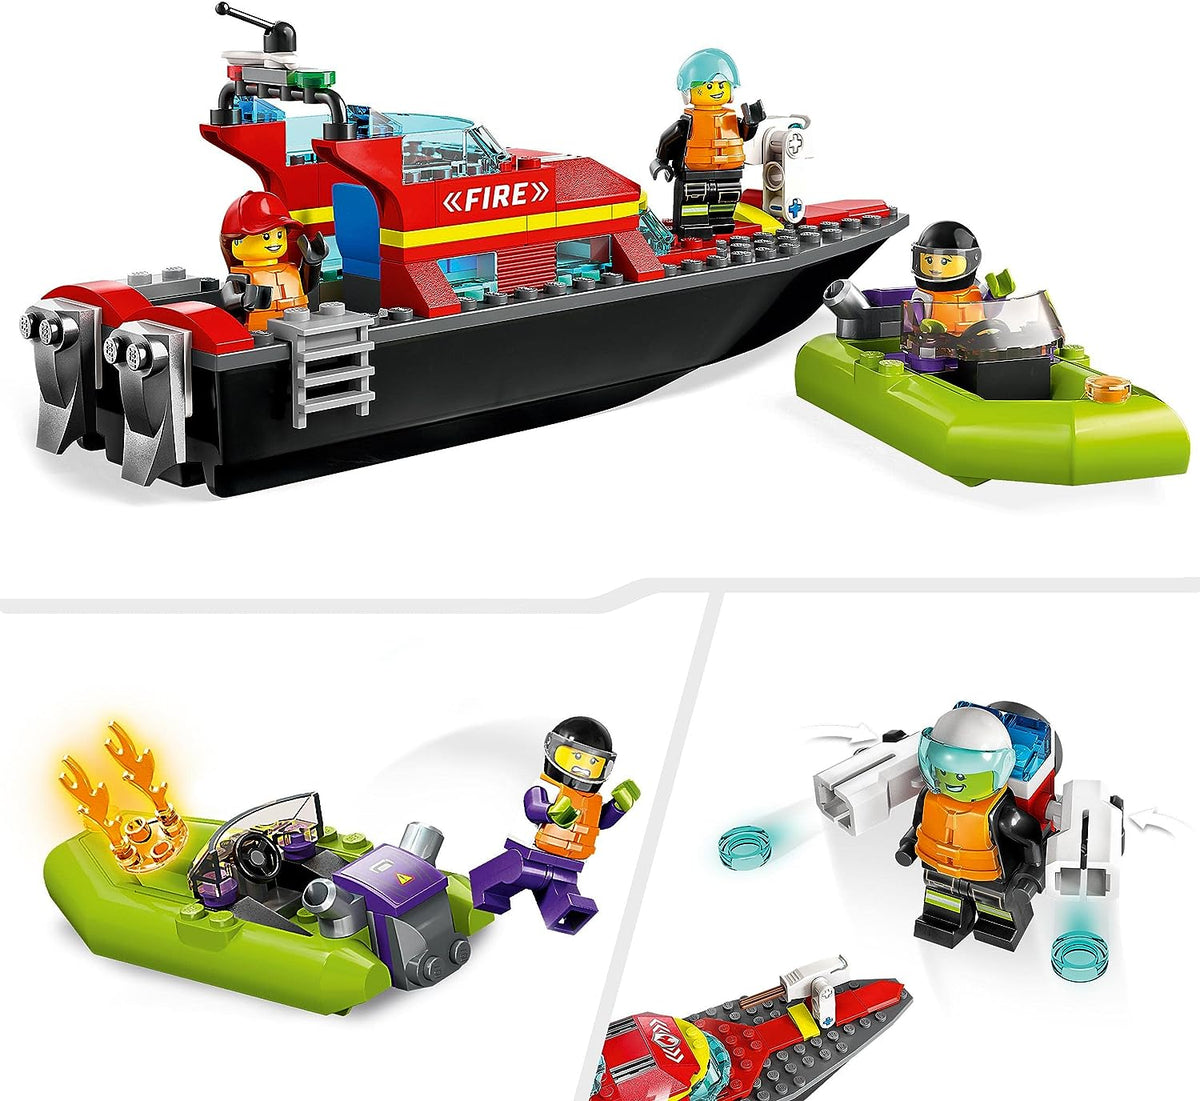 LEGO City Fire Rescue Boat Toy Building Set